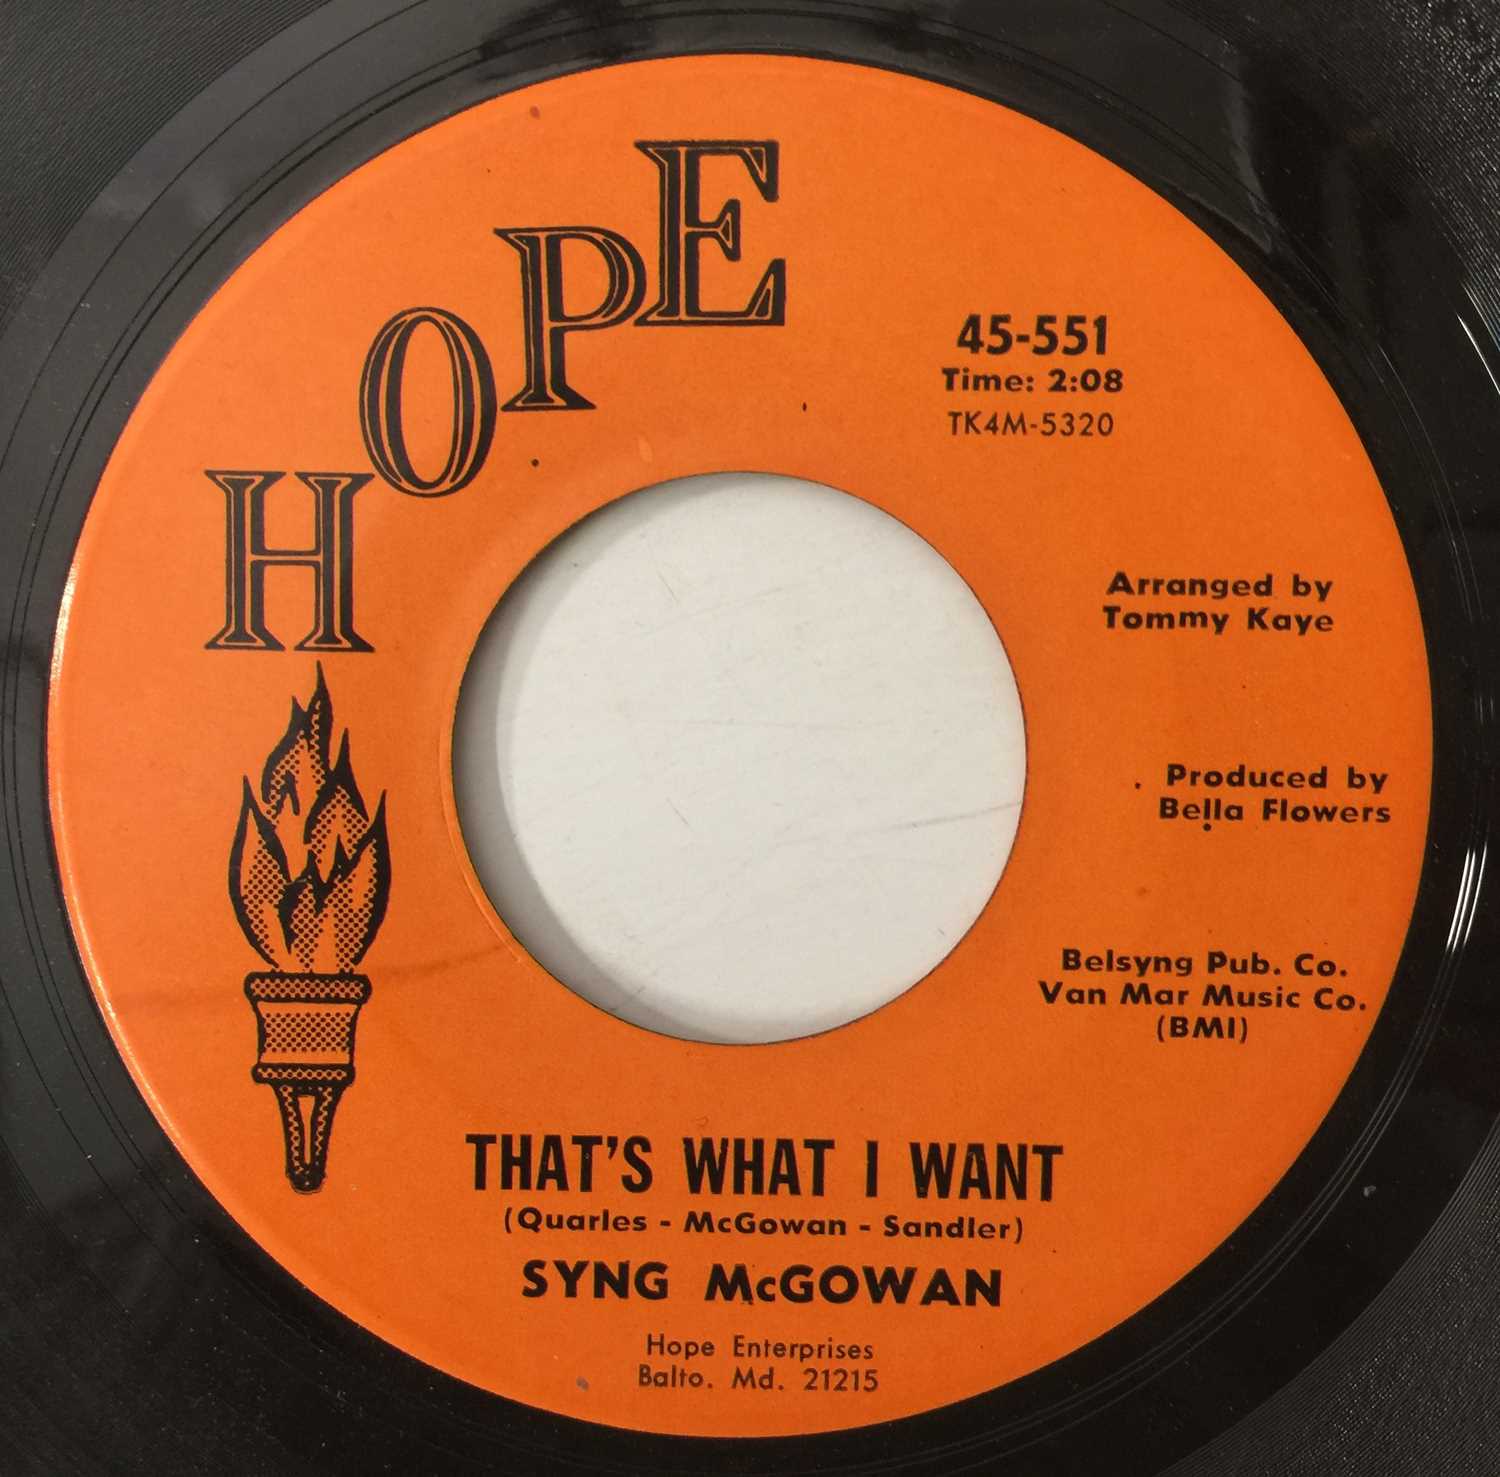 Lot 28 - SYNG MCGOWAN - THAT'S WHAT I WANT/ PEGGY DID 7" (US NORTHERN - HOPE - 45-551)